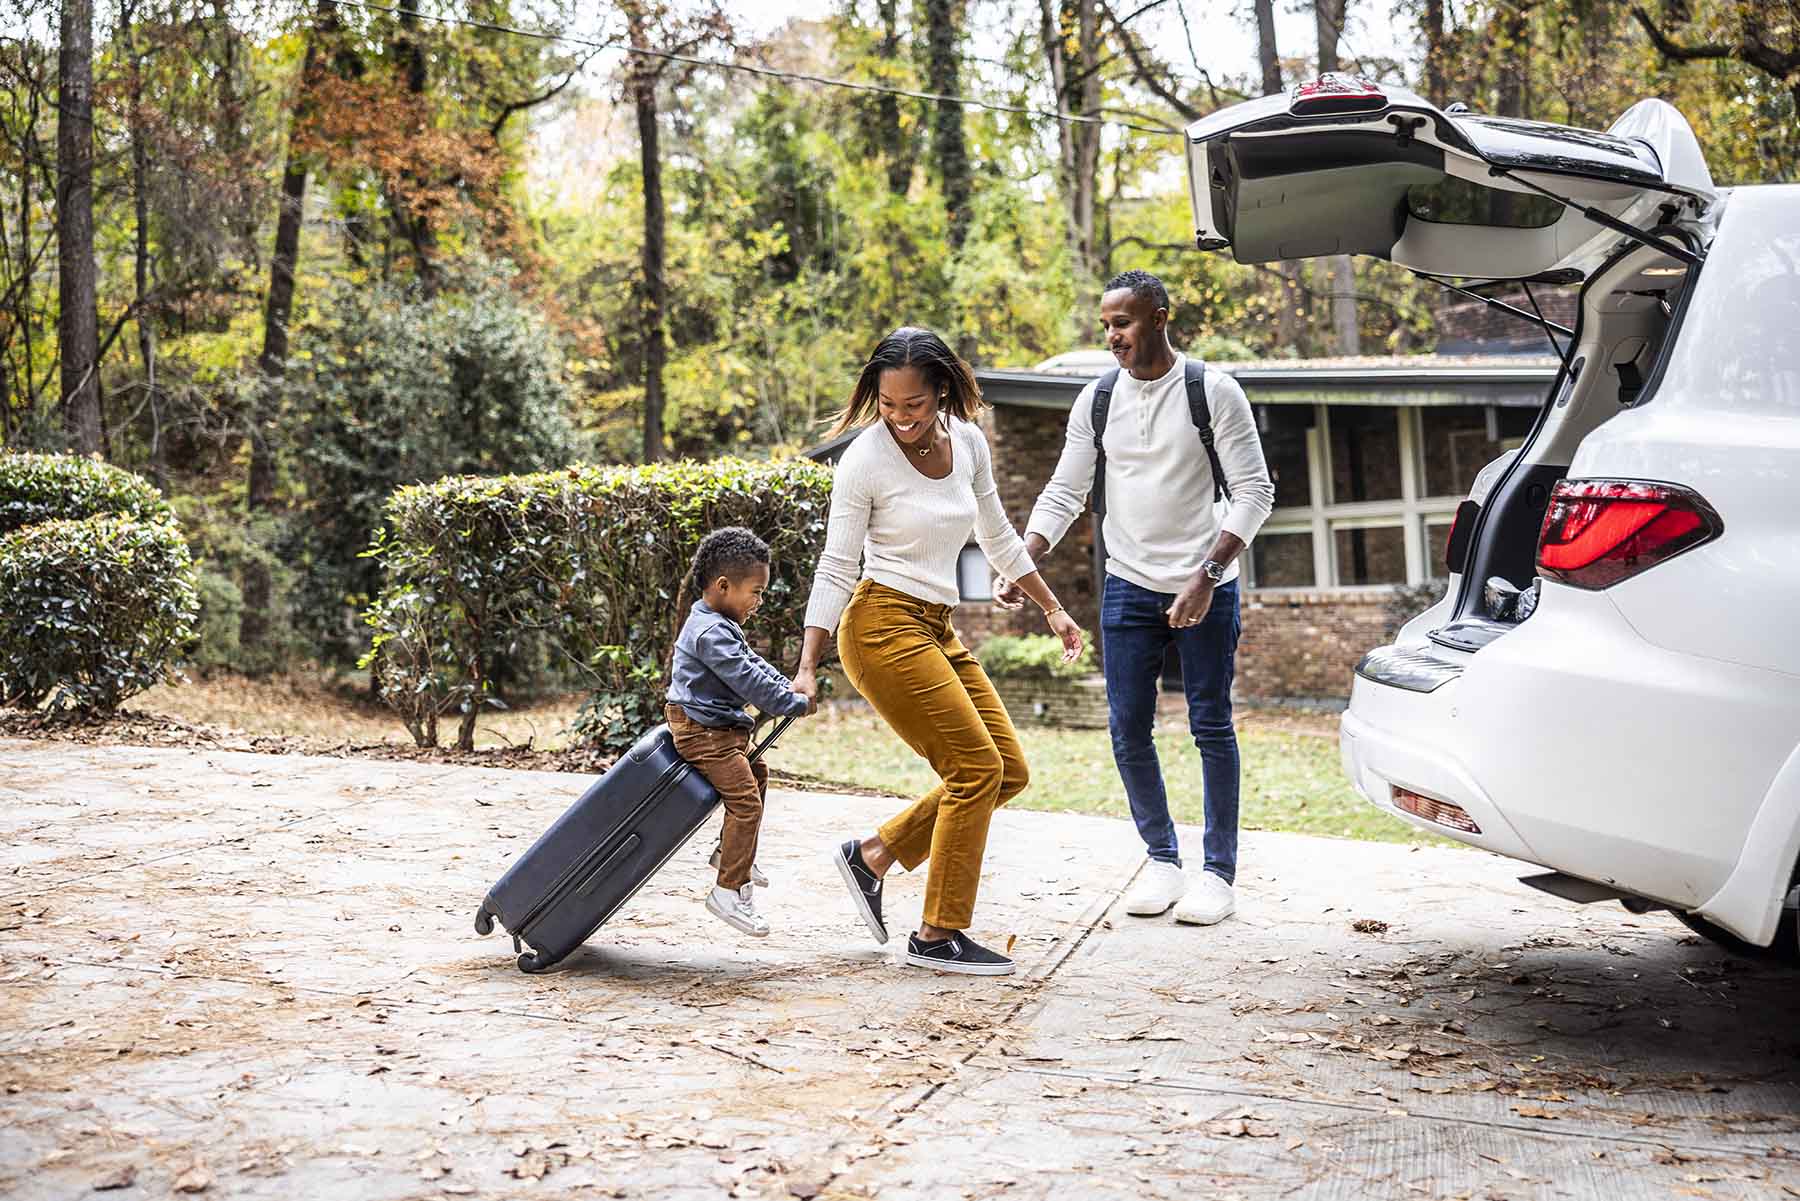 Mother pulling son on suitcase and loading car for family vacation